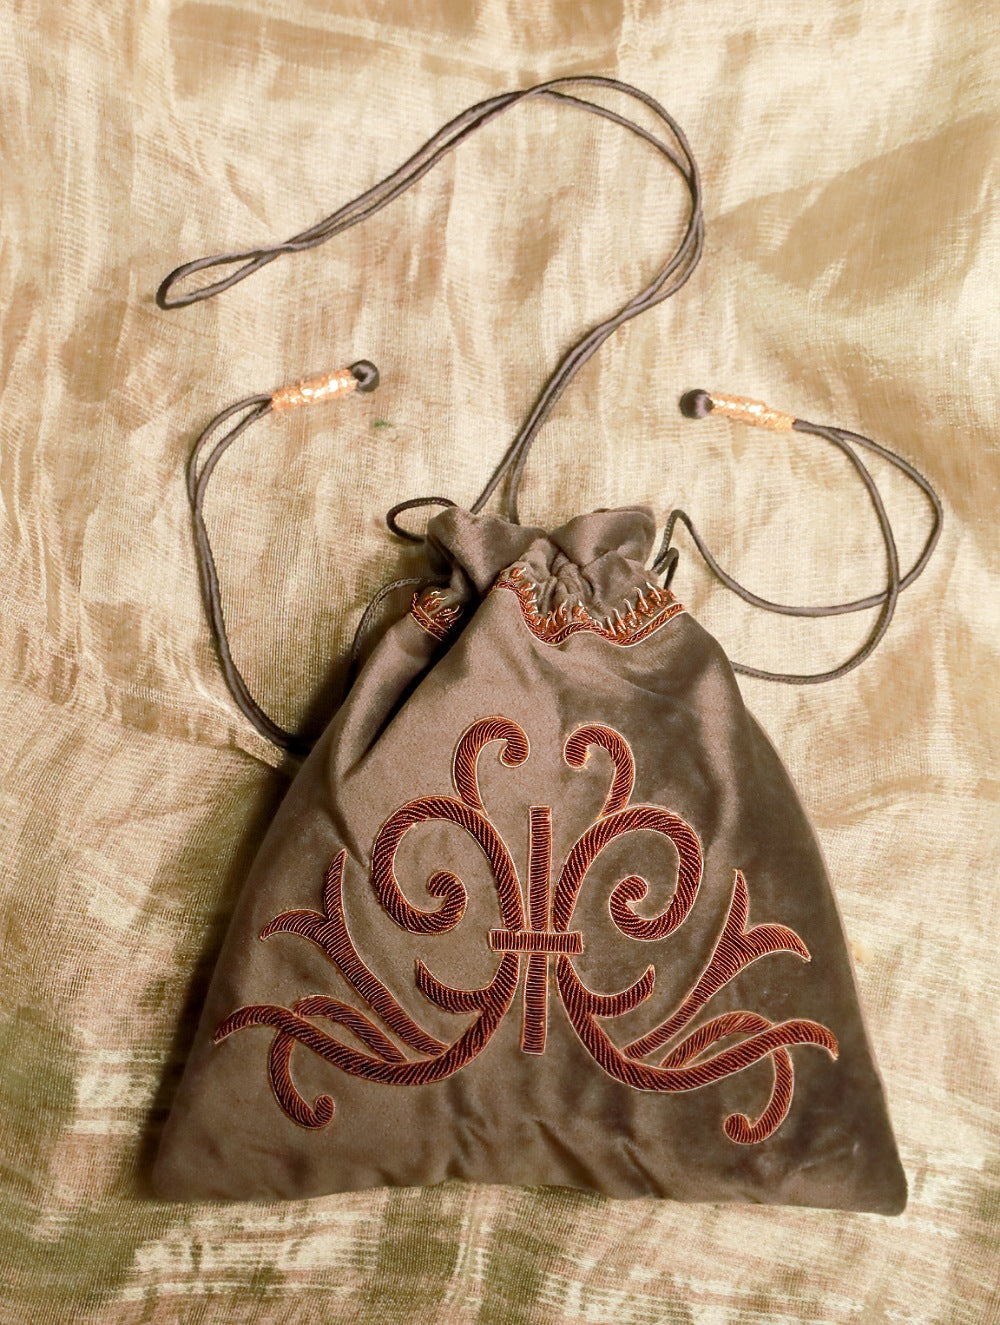 Load image into Gallery viewer, Zardozi and Resham Embroidered Evening Potli Bag - Pearl Grey Ornate